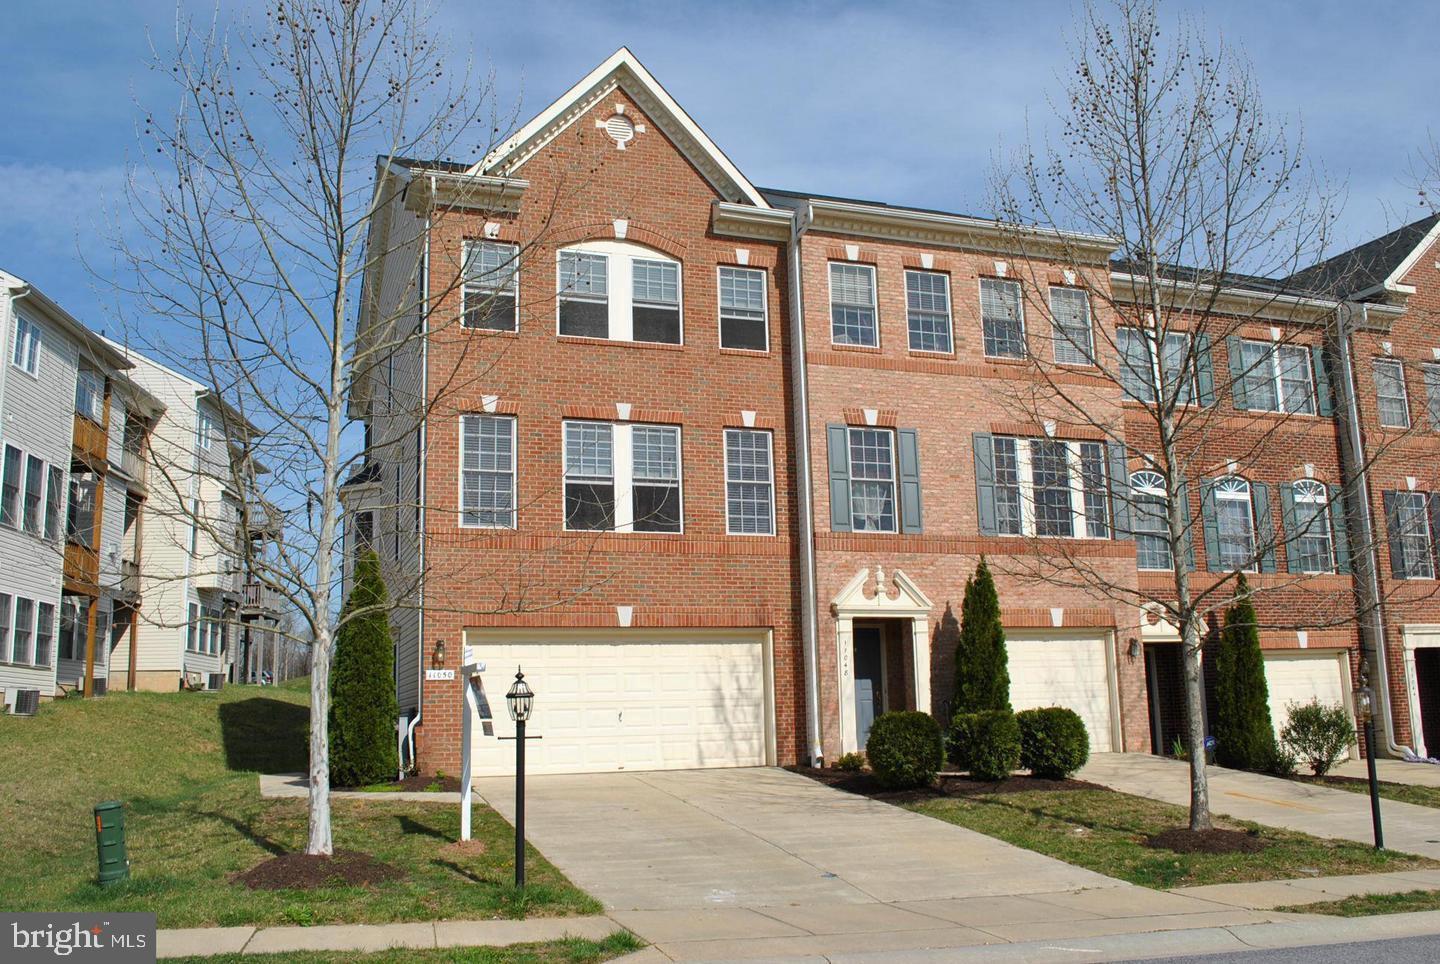 View Laurel, MD 20723 townhome